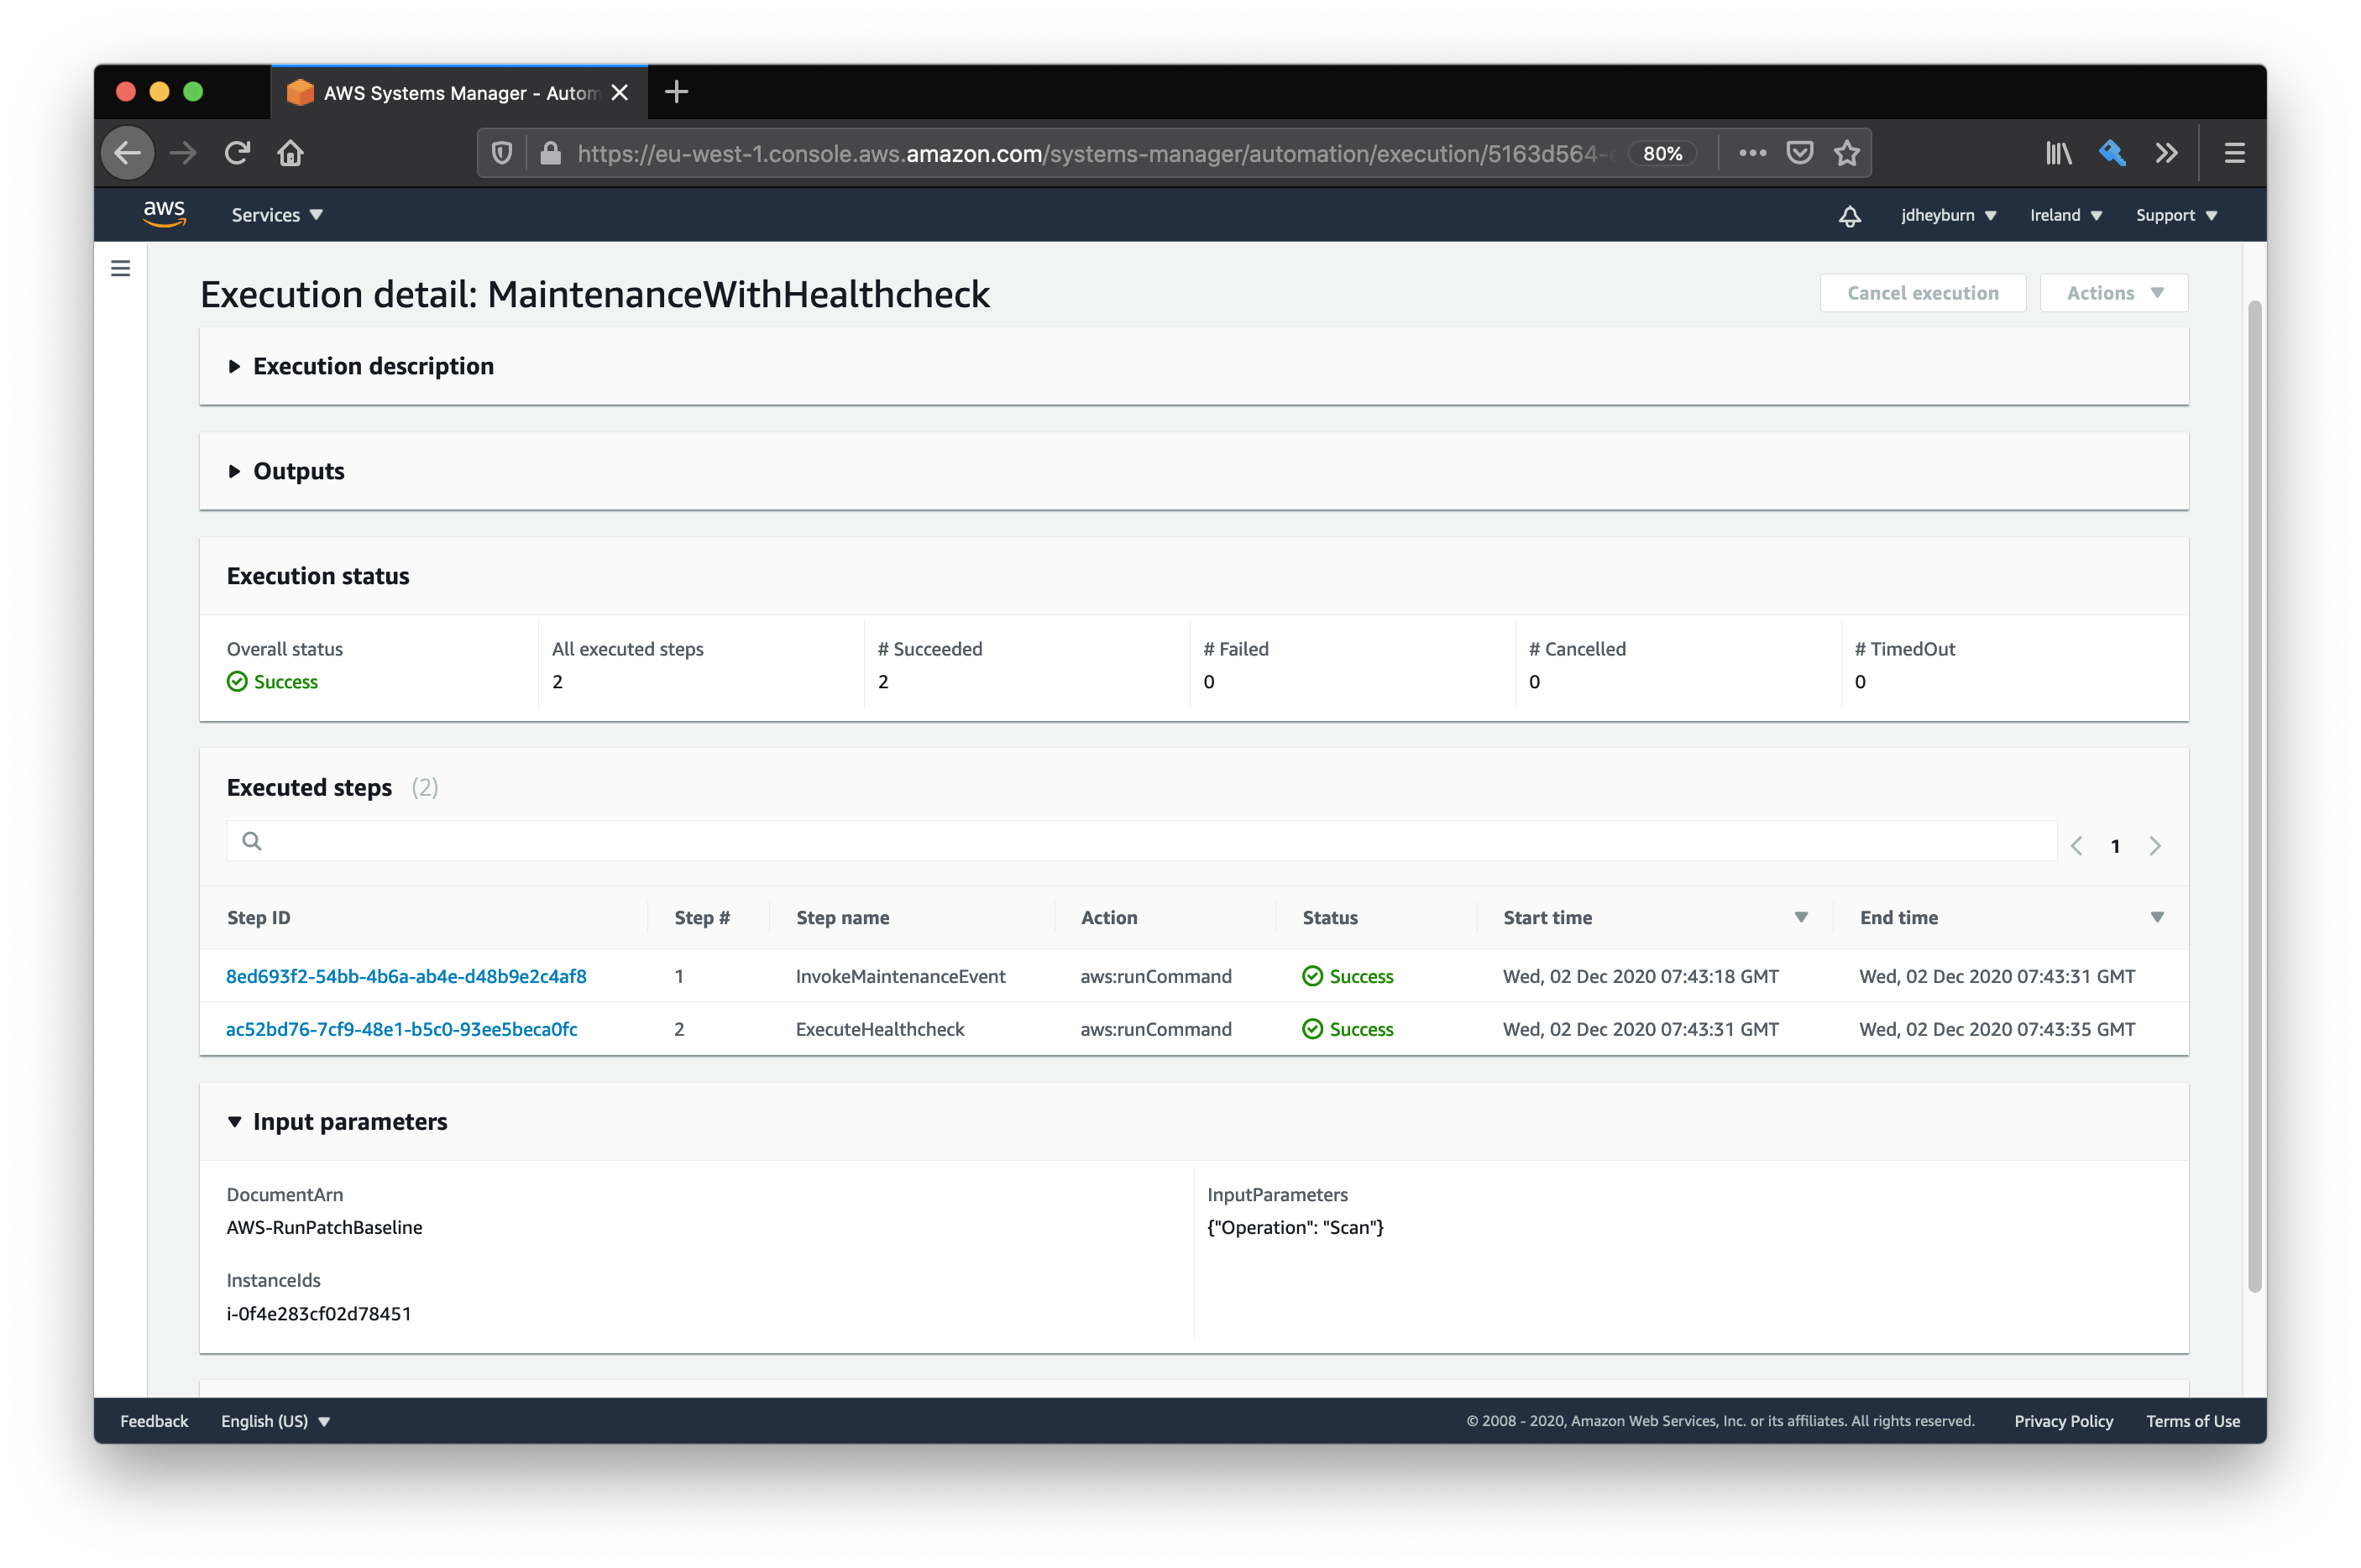 The automation execution overview page shows that two steps were invoked, InvokeMaintenanceEvent and ExecuteHealthcheck, both are successful. We can also see the input for InvokeMaintenanceEvent is specified as AWS-RunPatchBaseline, and the parameters we used previously.